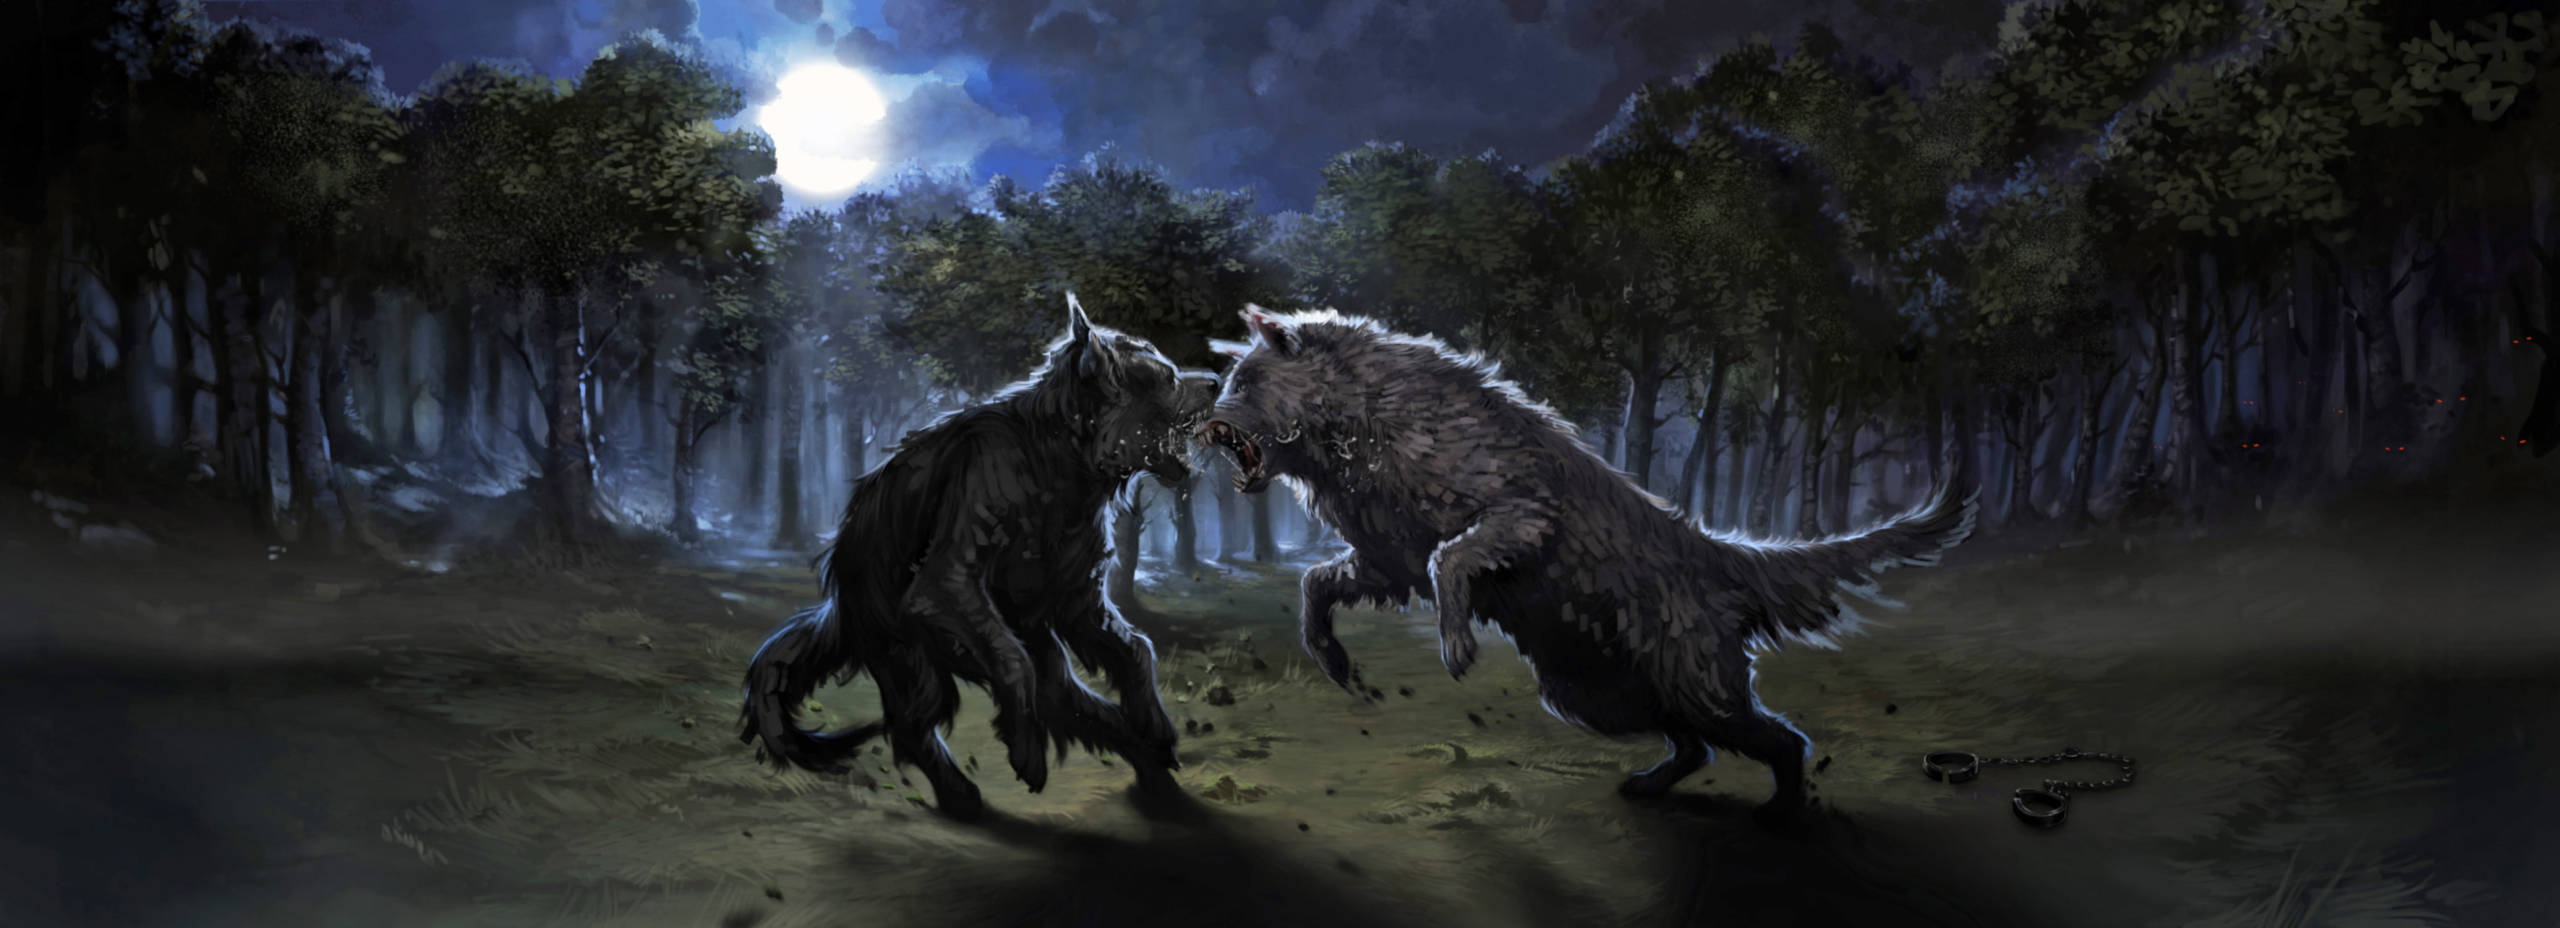 Remus and Sirius fight as werewolf and dog.